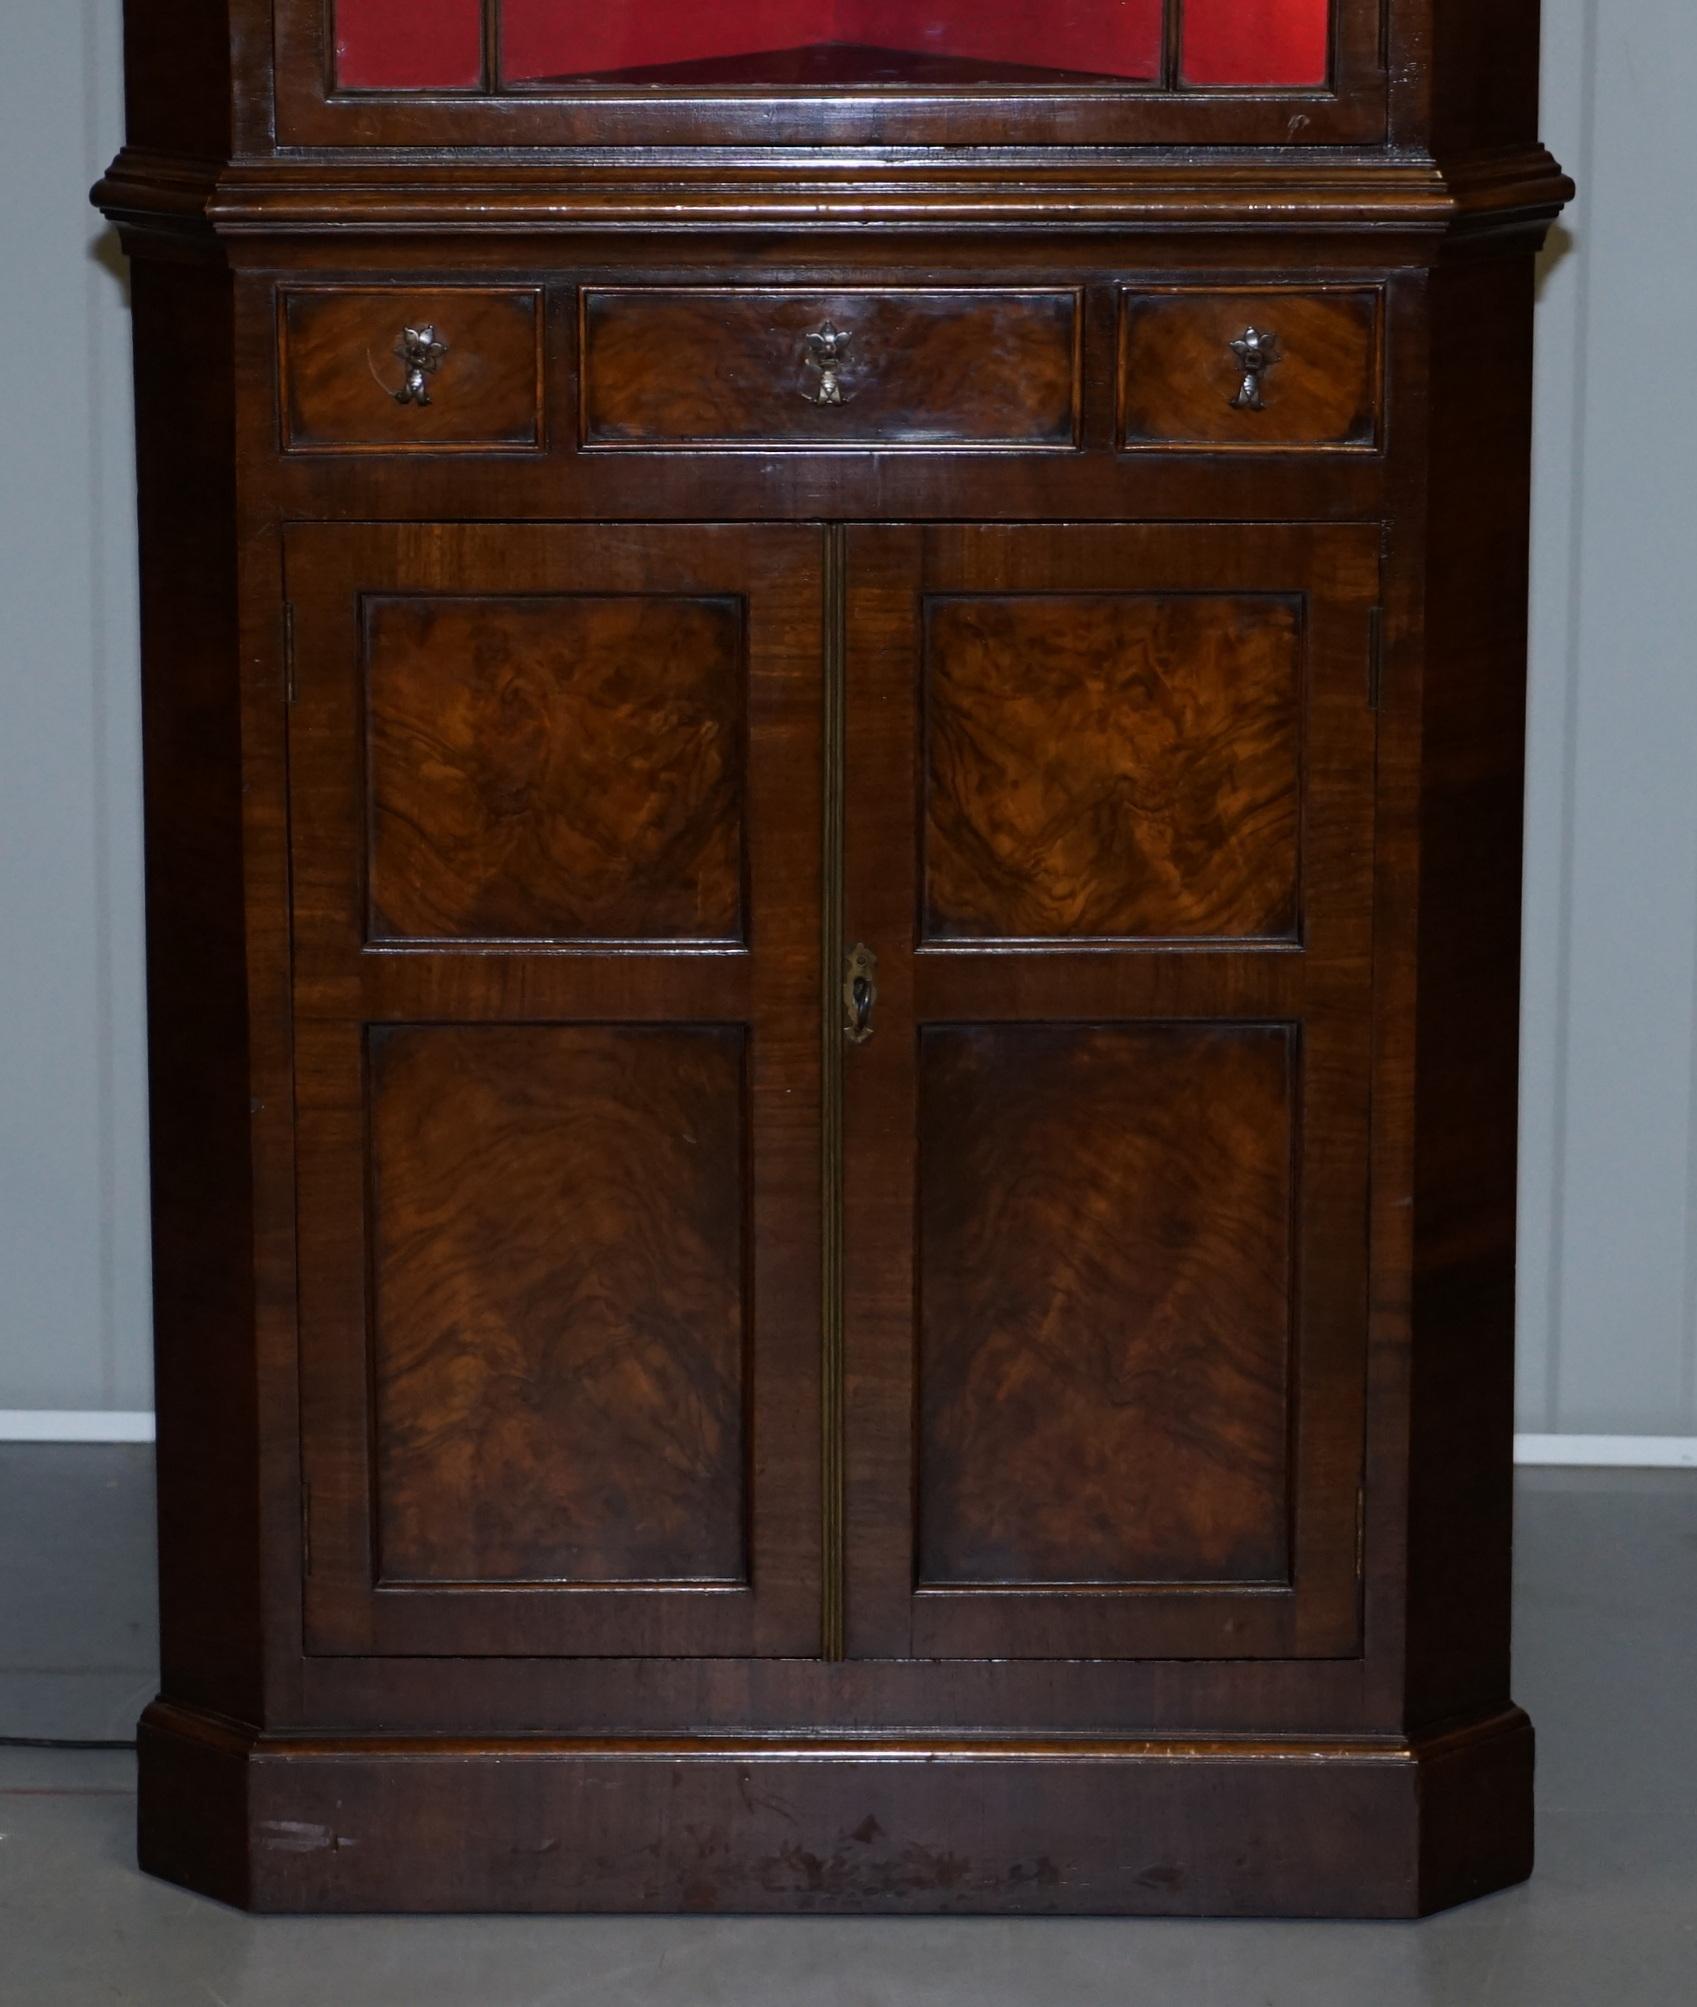 We are delighted to offer for sale this stunning circa 1800 Georgian walnut astral glazed corner cabinet with later added internal lighting

A good looking functional and decorative piece of antique furniture. This is astral glazed to the top with